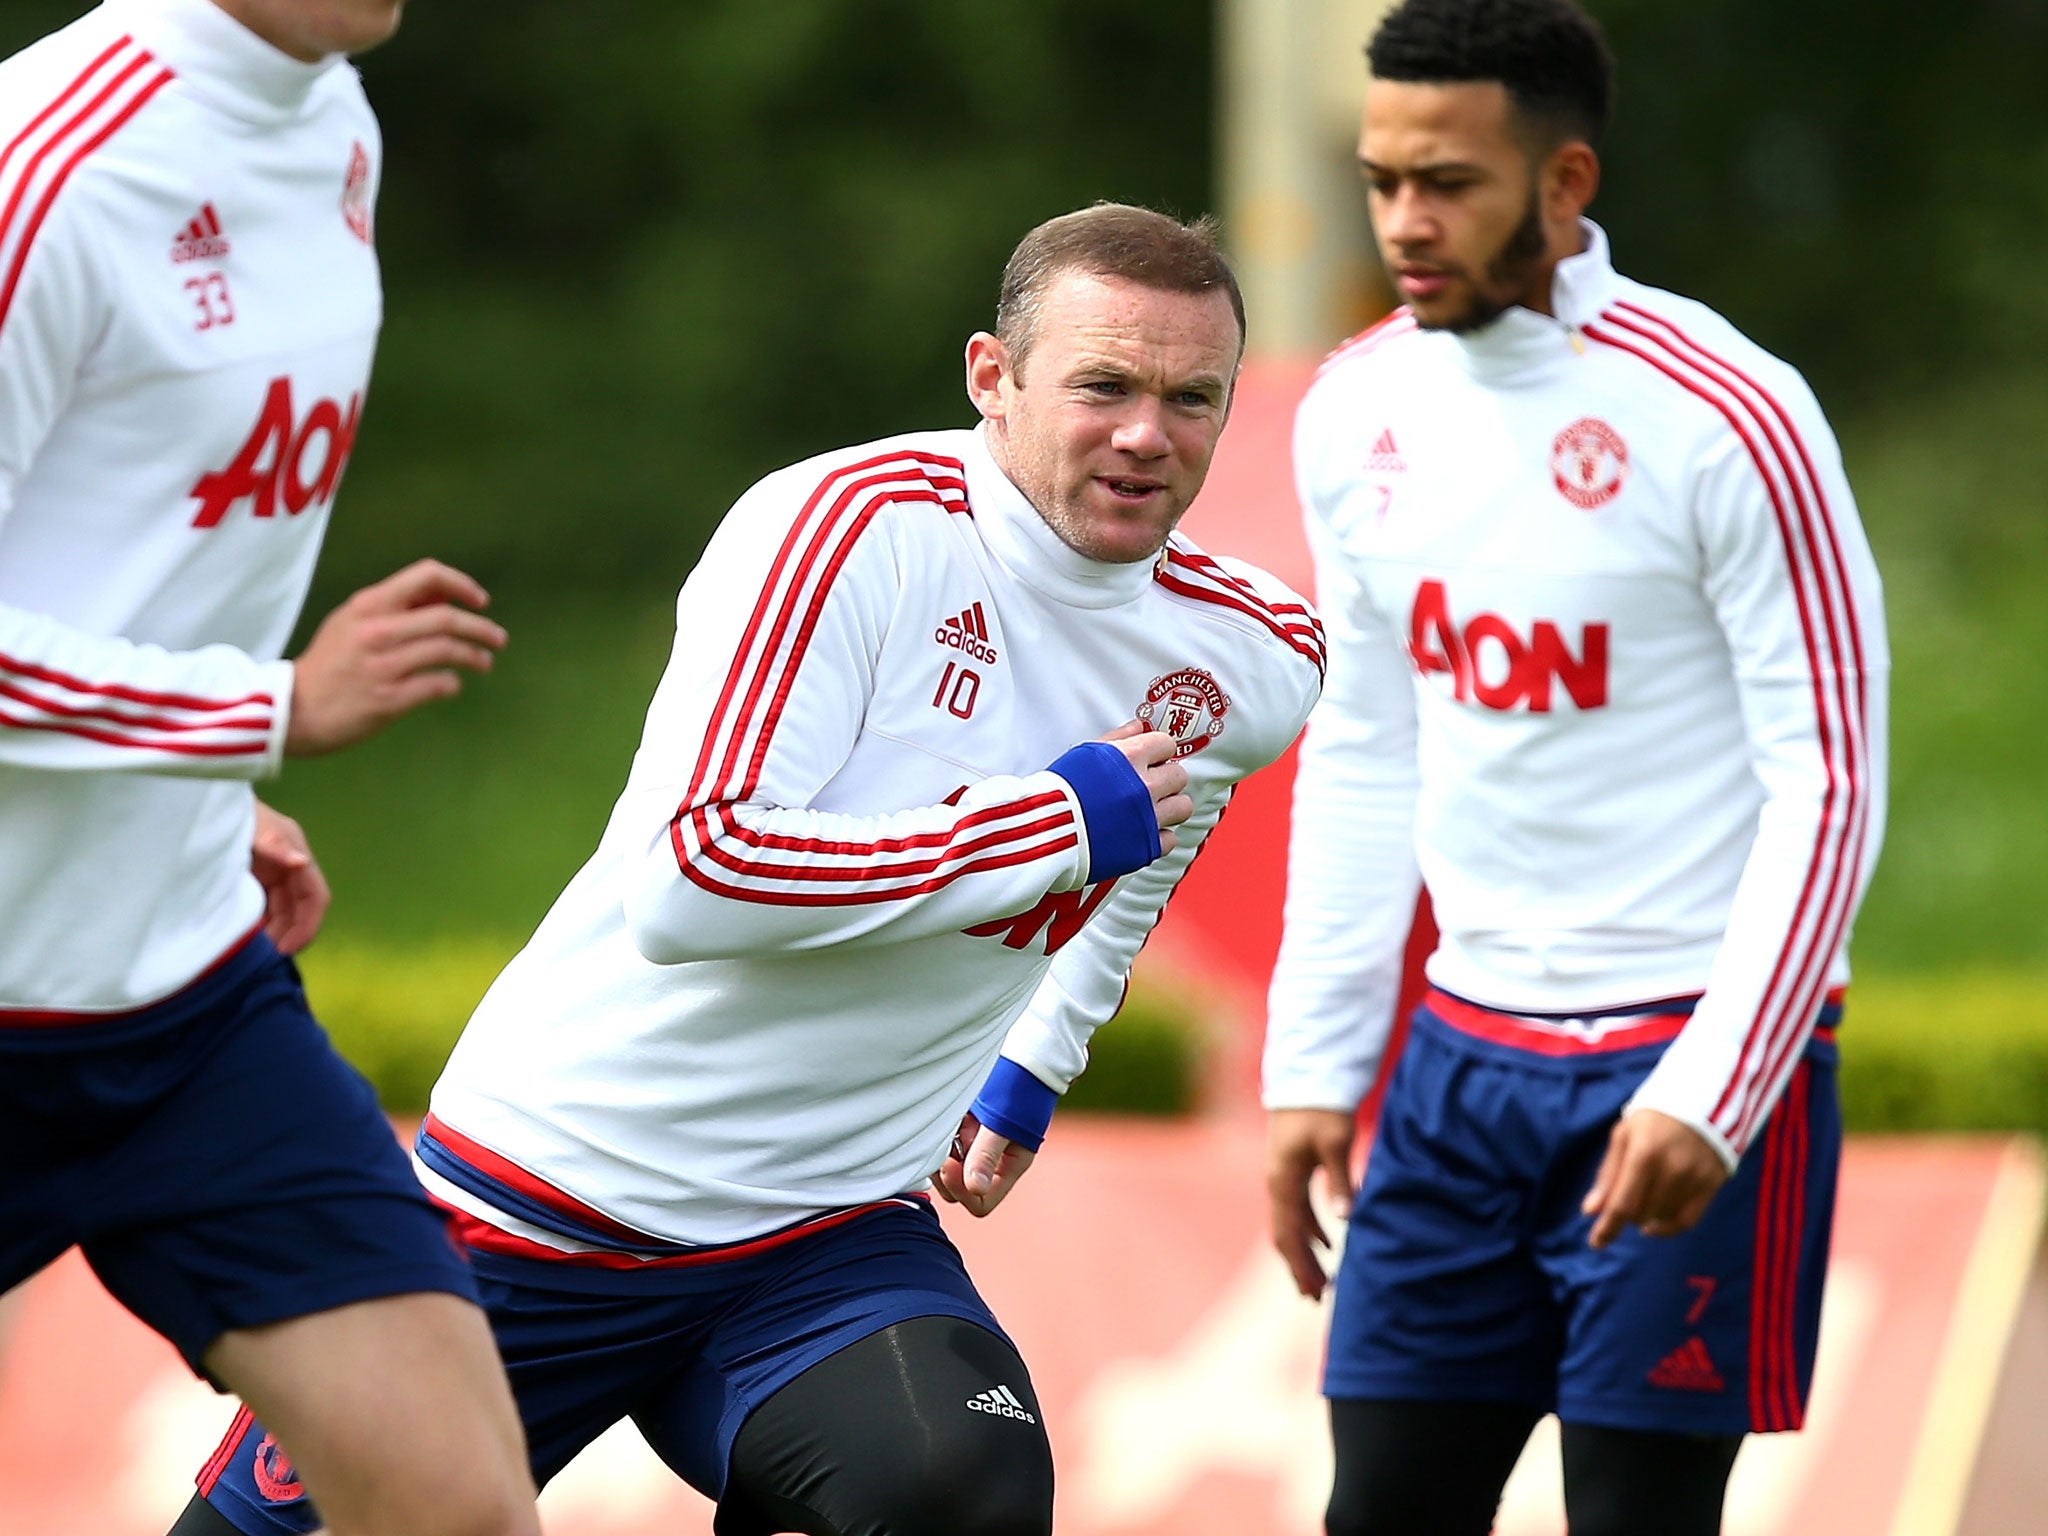 Wayne Rooney in training with Manchester United ahead of the FA Cup final